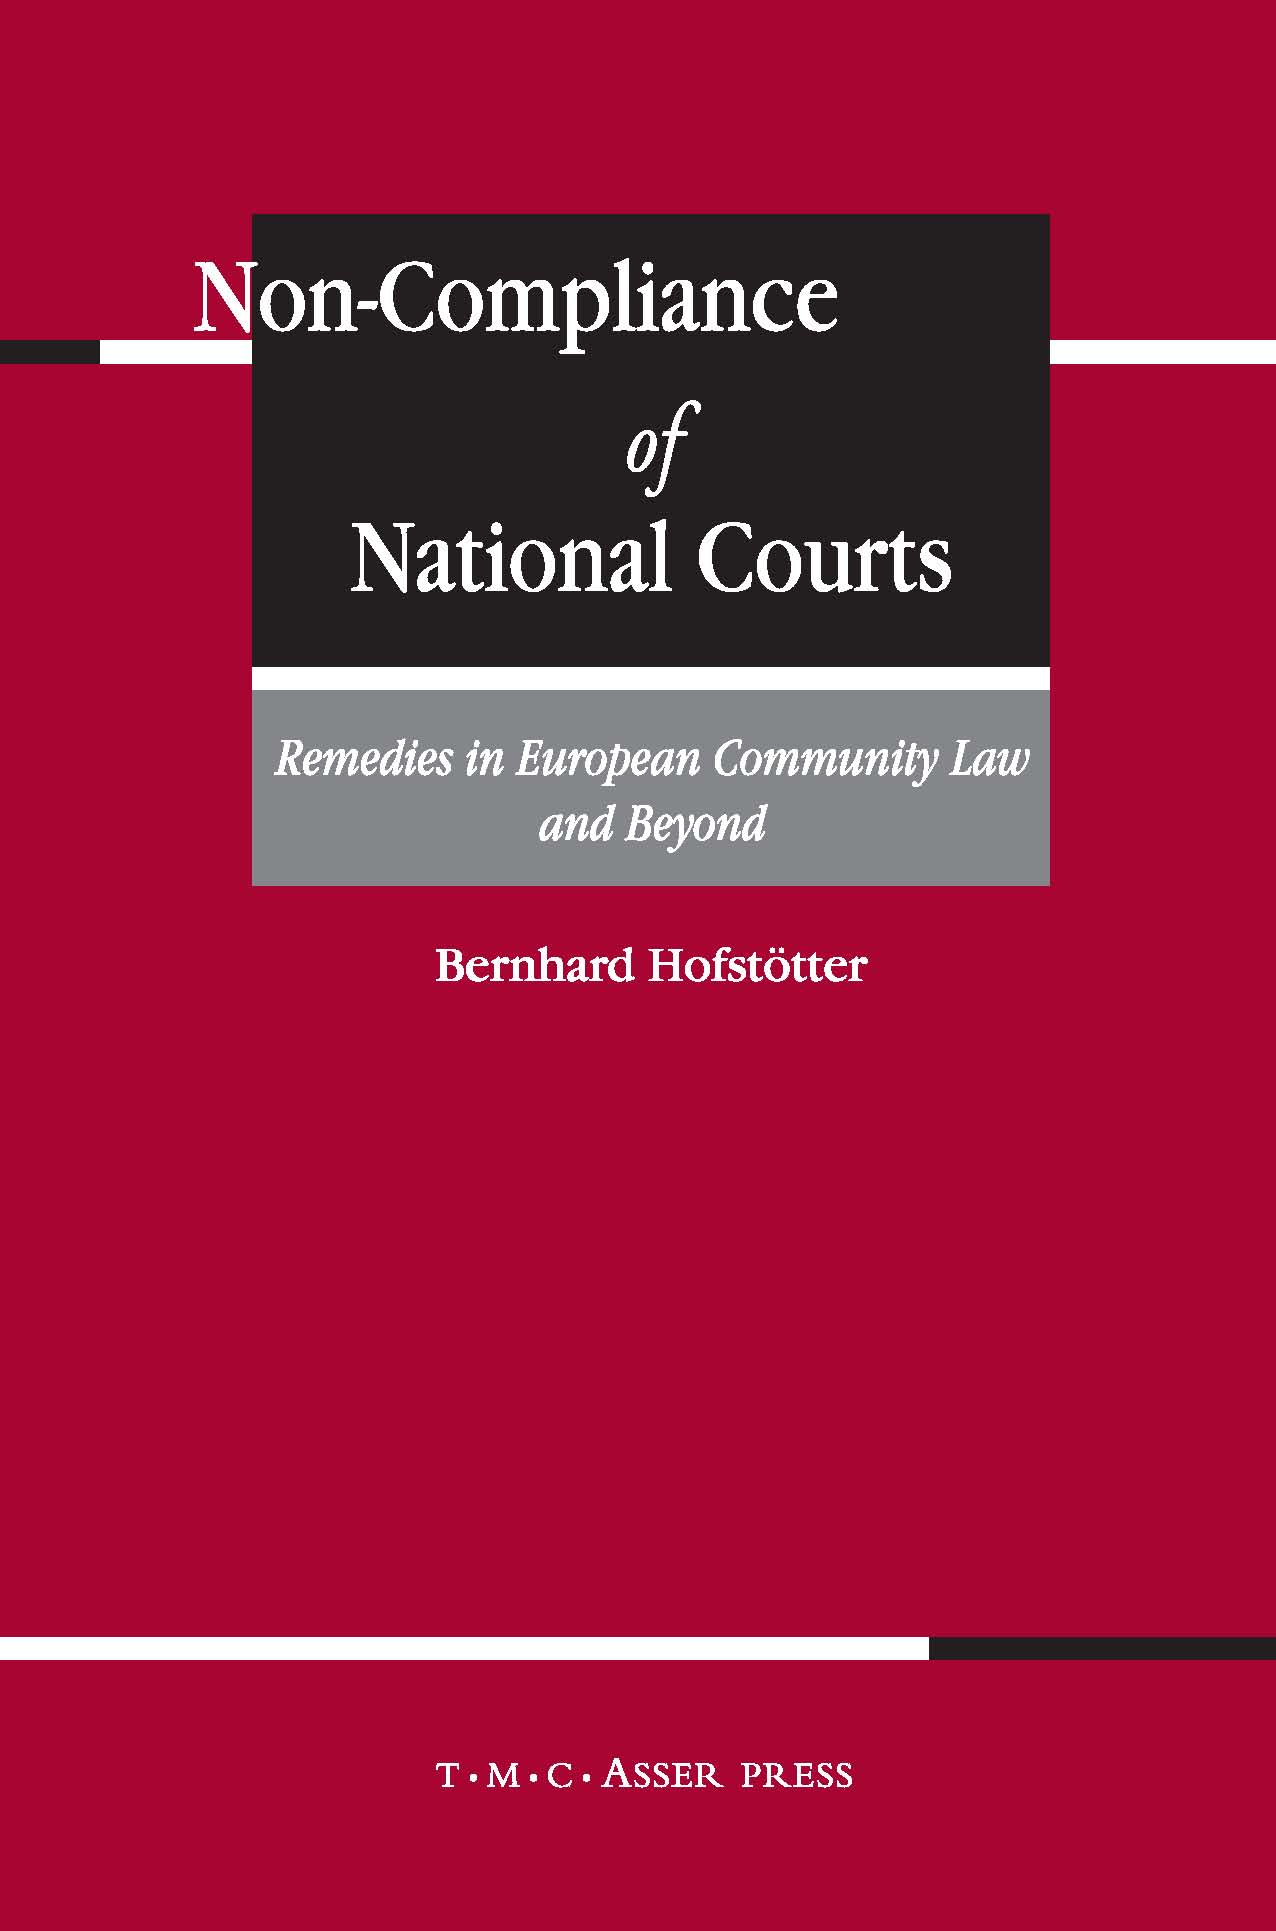 Non-Compliance of National Courts - Remedies in European Community Law and Beyond